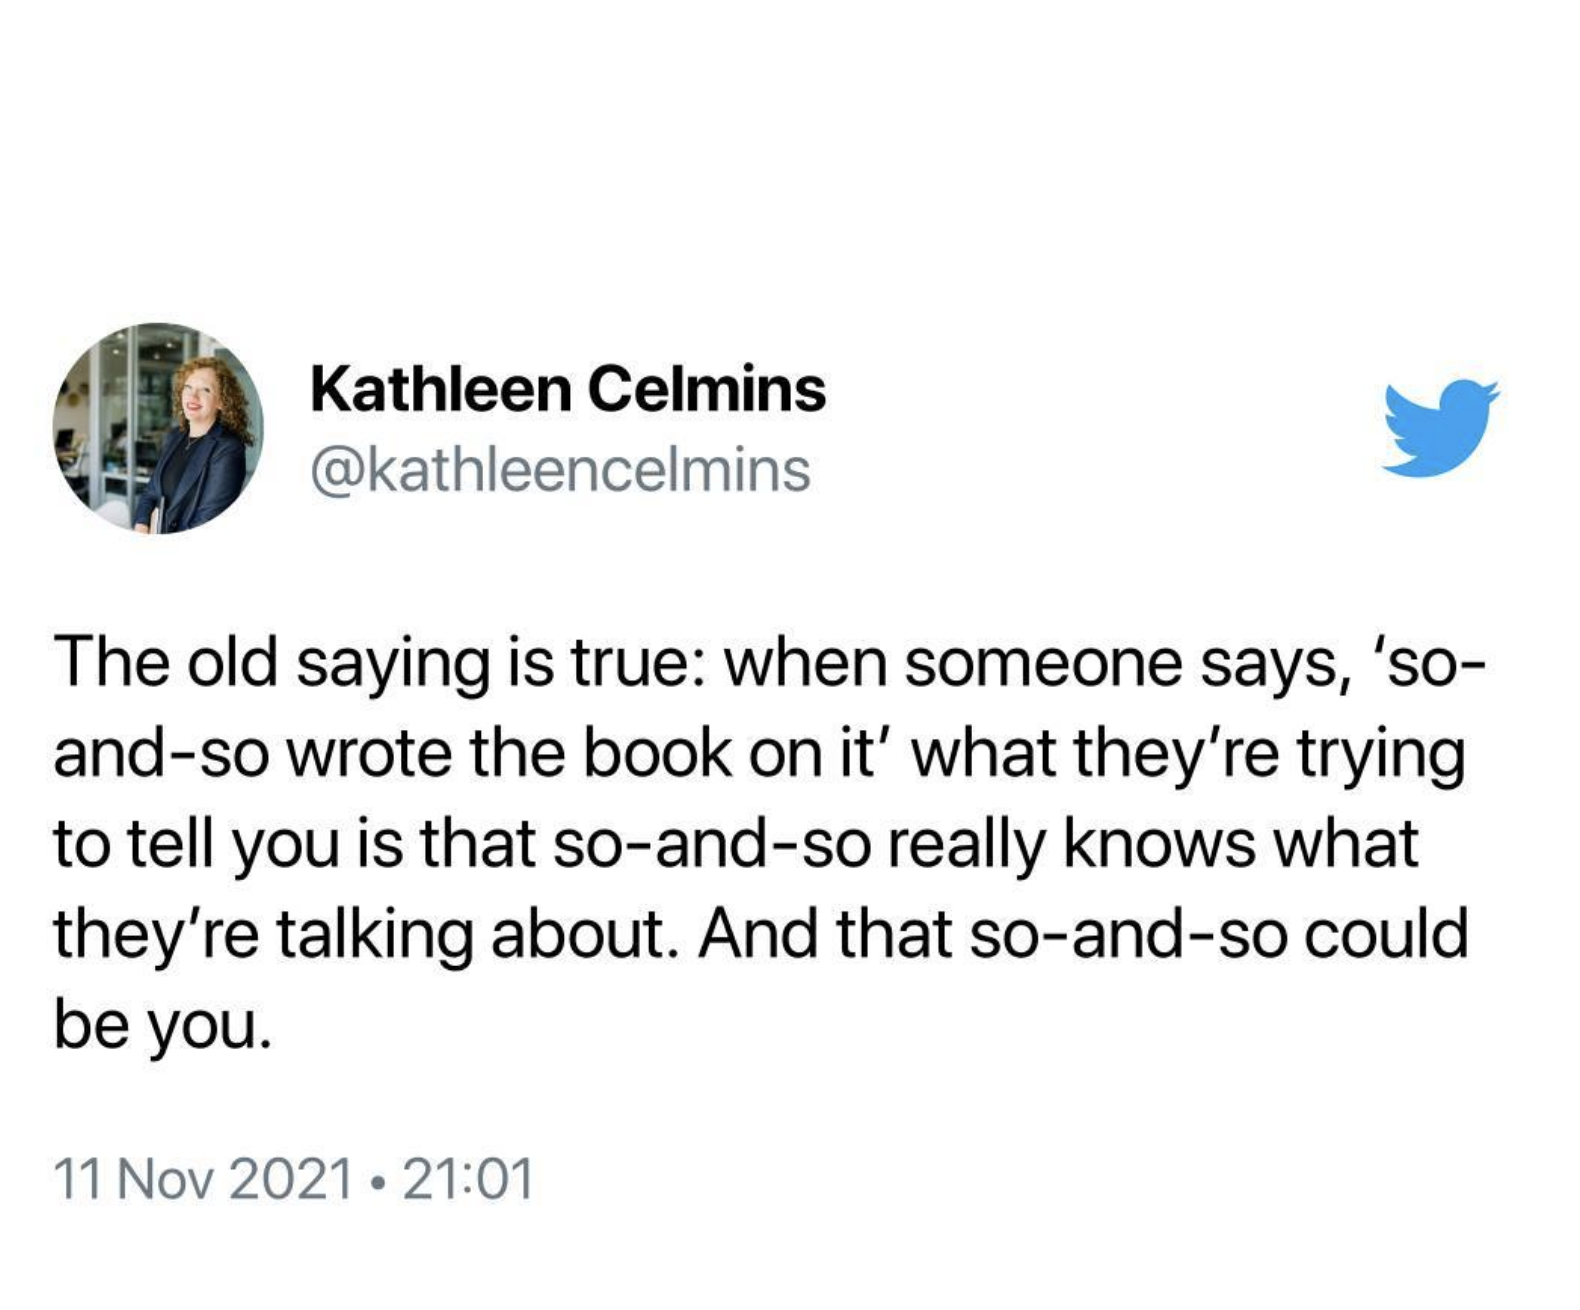 Screenshot of a Tweet reposted on Instagram (very meta) saying "The old saying is true: when someone says 'so-and-so wrote the book on it' what they're trying to tell you is that so-and-so really knows what they're talking about. And that so-and-so could be you.